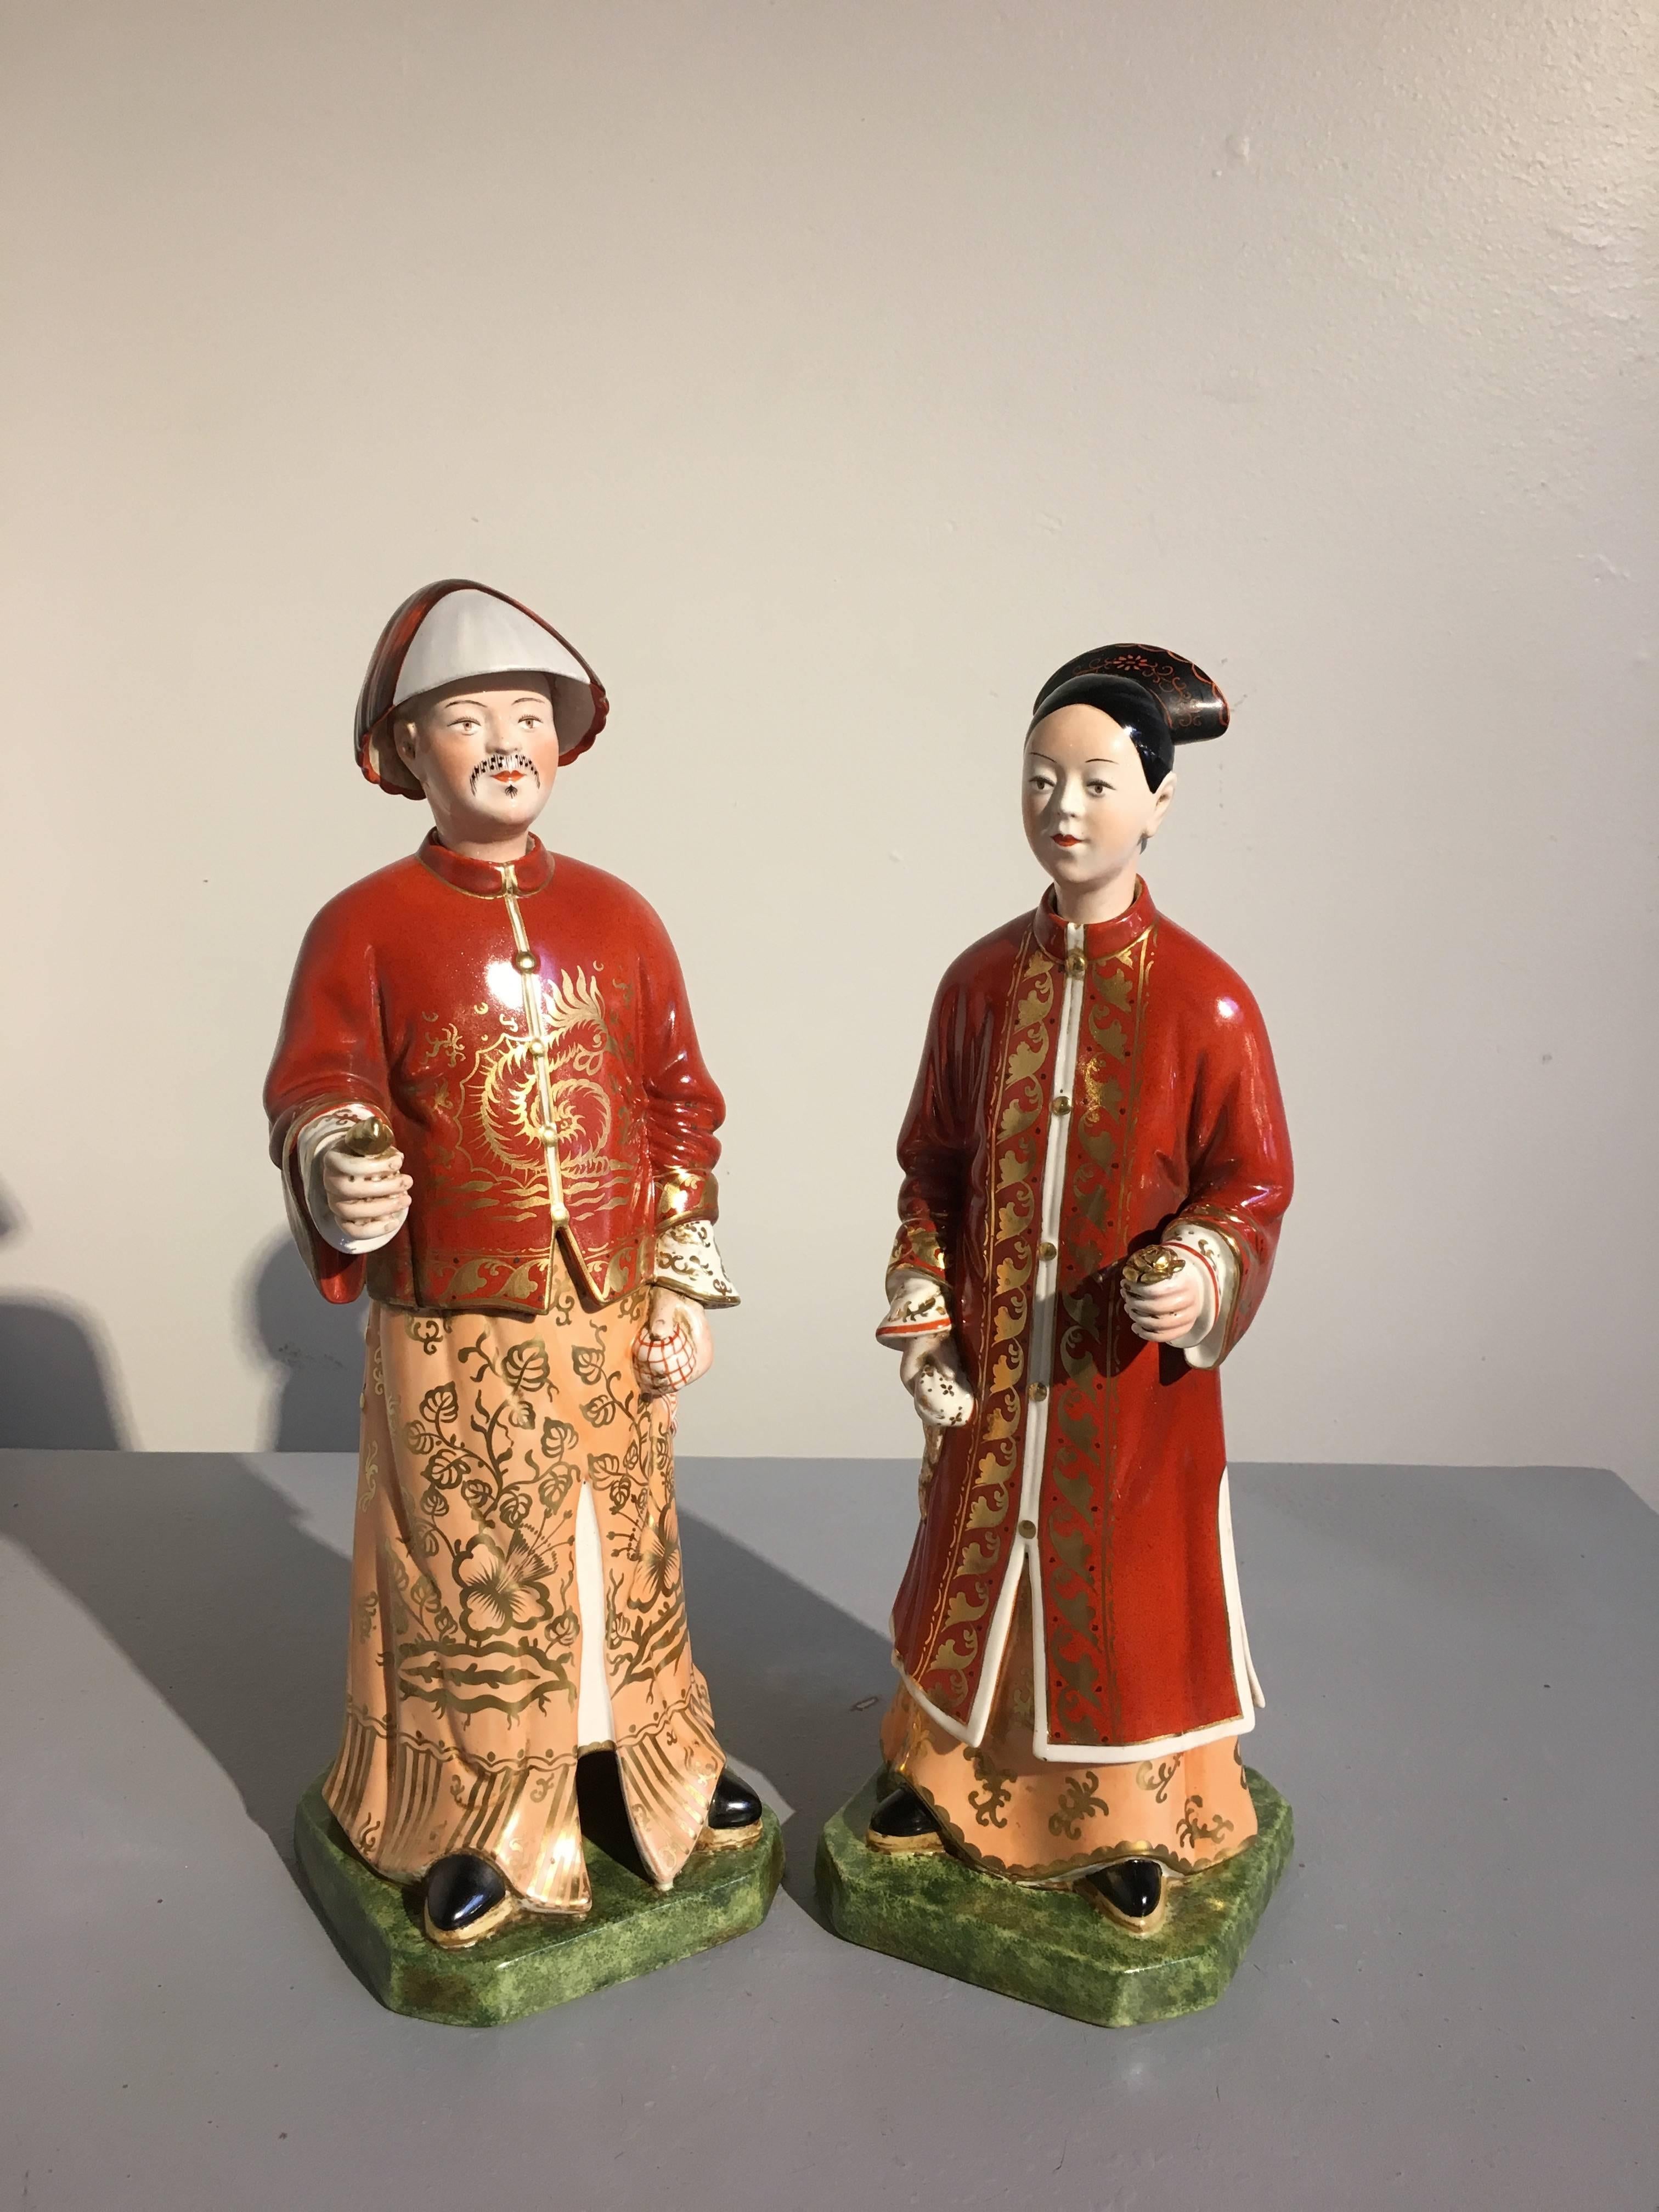 A fine pair of Italian porcelain chinoiserie nodding head figures of a Chinese Mandarin couple, made for the Marbo Lamp Company, circa 1960's, Inlay.

The charming figures portrayed standing upon short plinths and dressed elegantly in sumptuous gilt